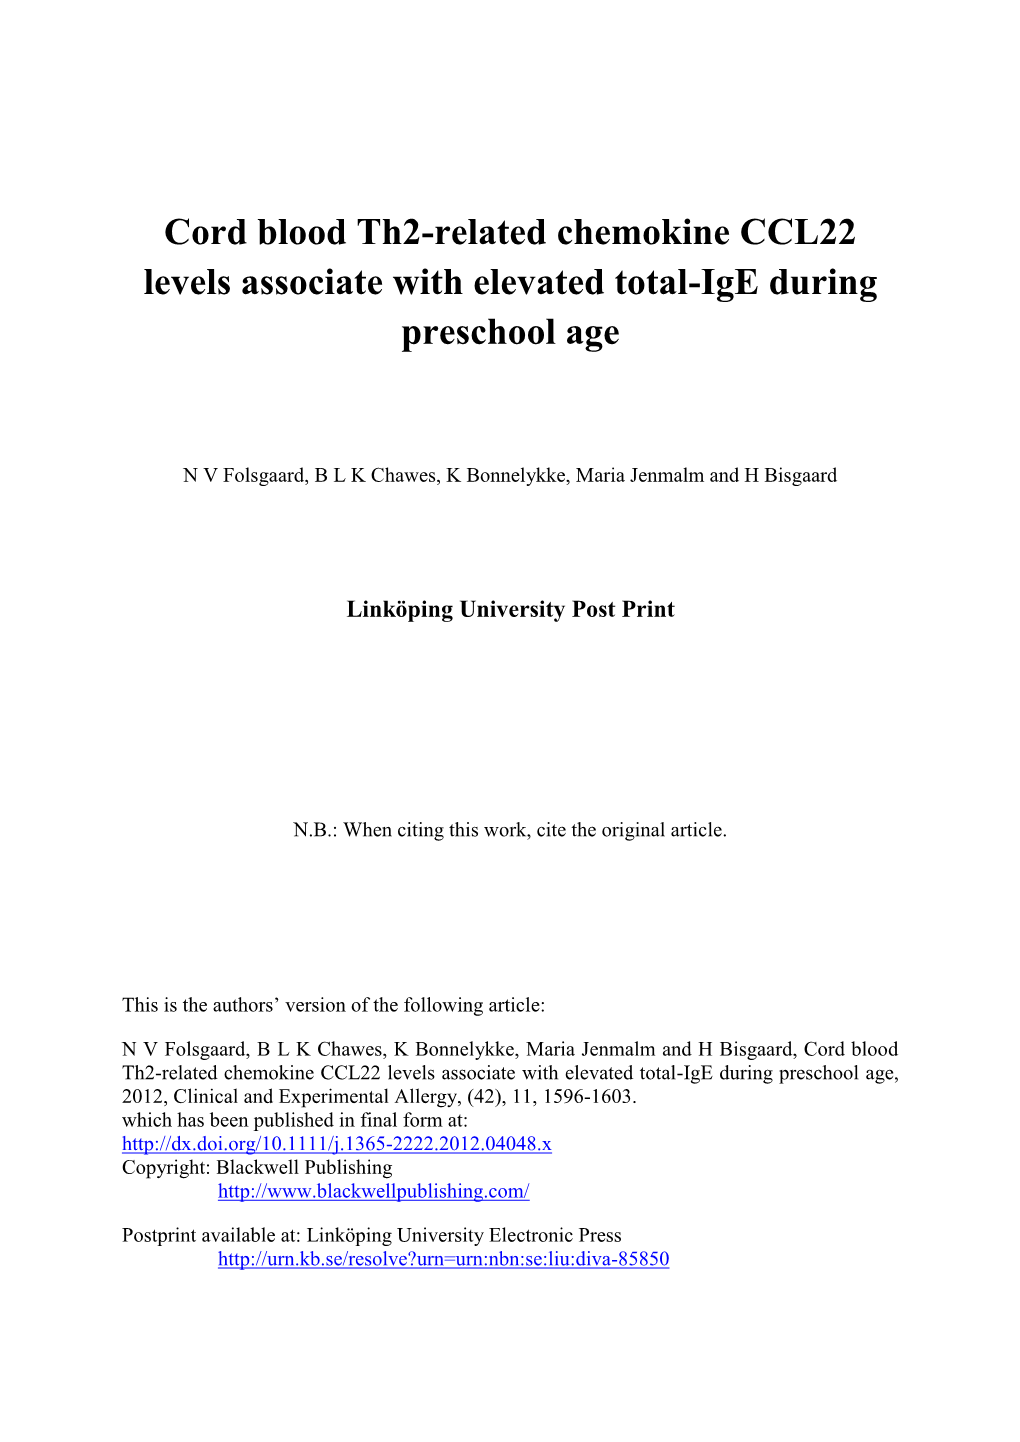 Cord Blood Th2-Related Chemokine CCL22 Levels Associate with Elevated Total-Ige During Preschool Age